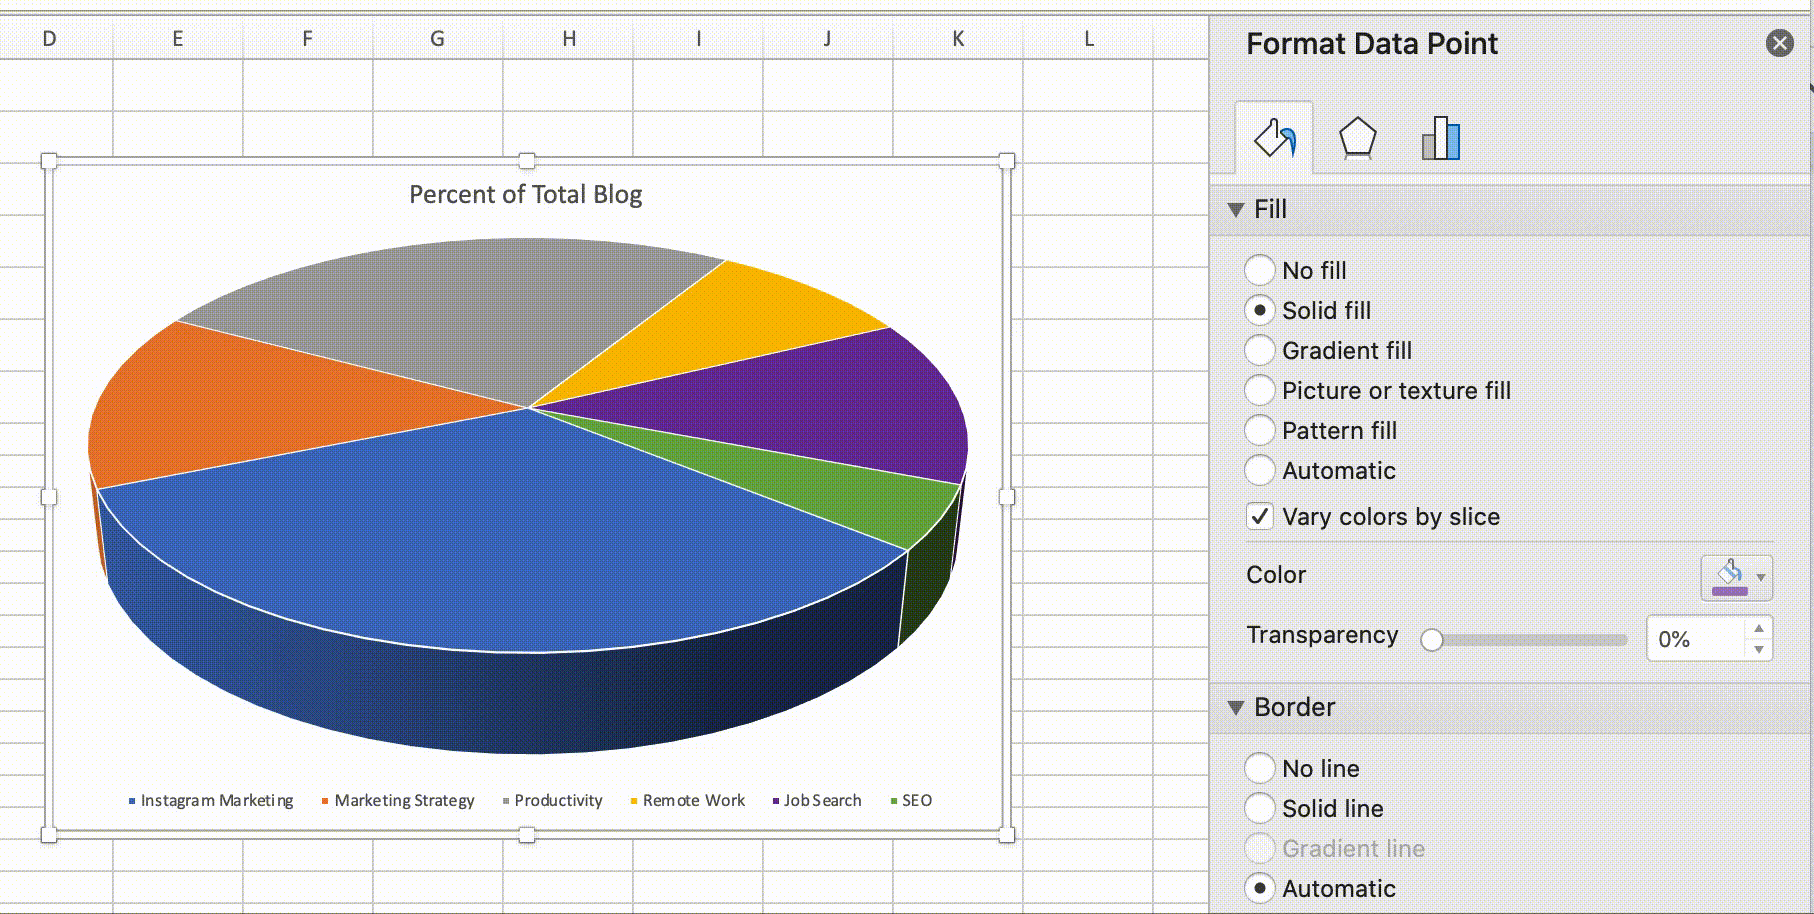 how to change the color of an individual pie chart piece in excel.